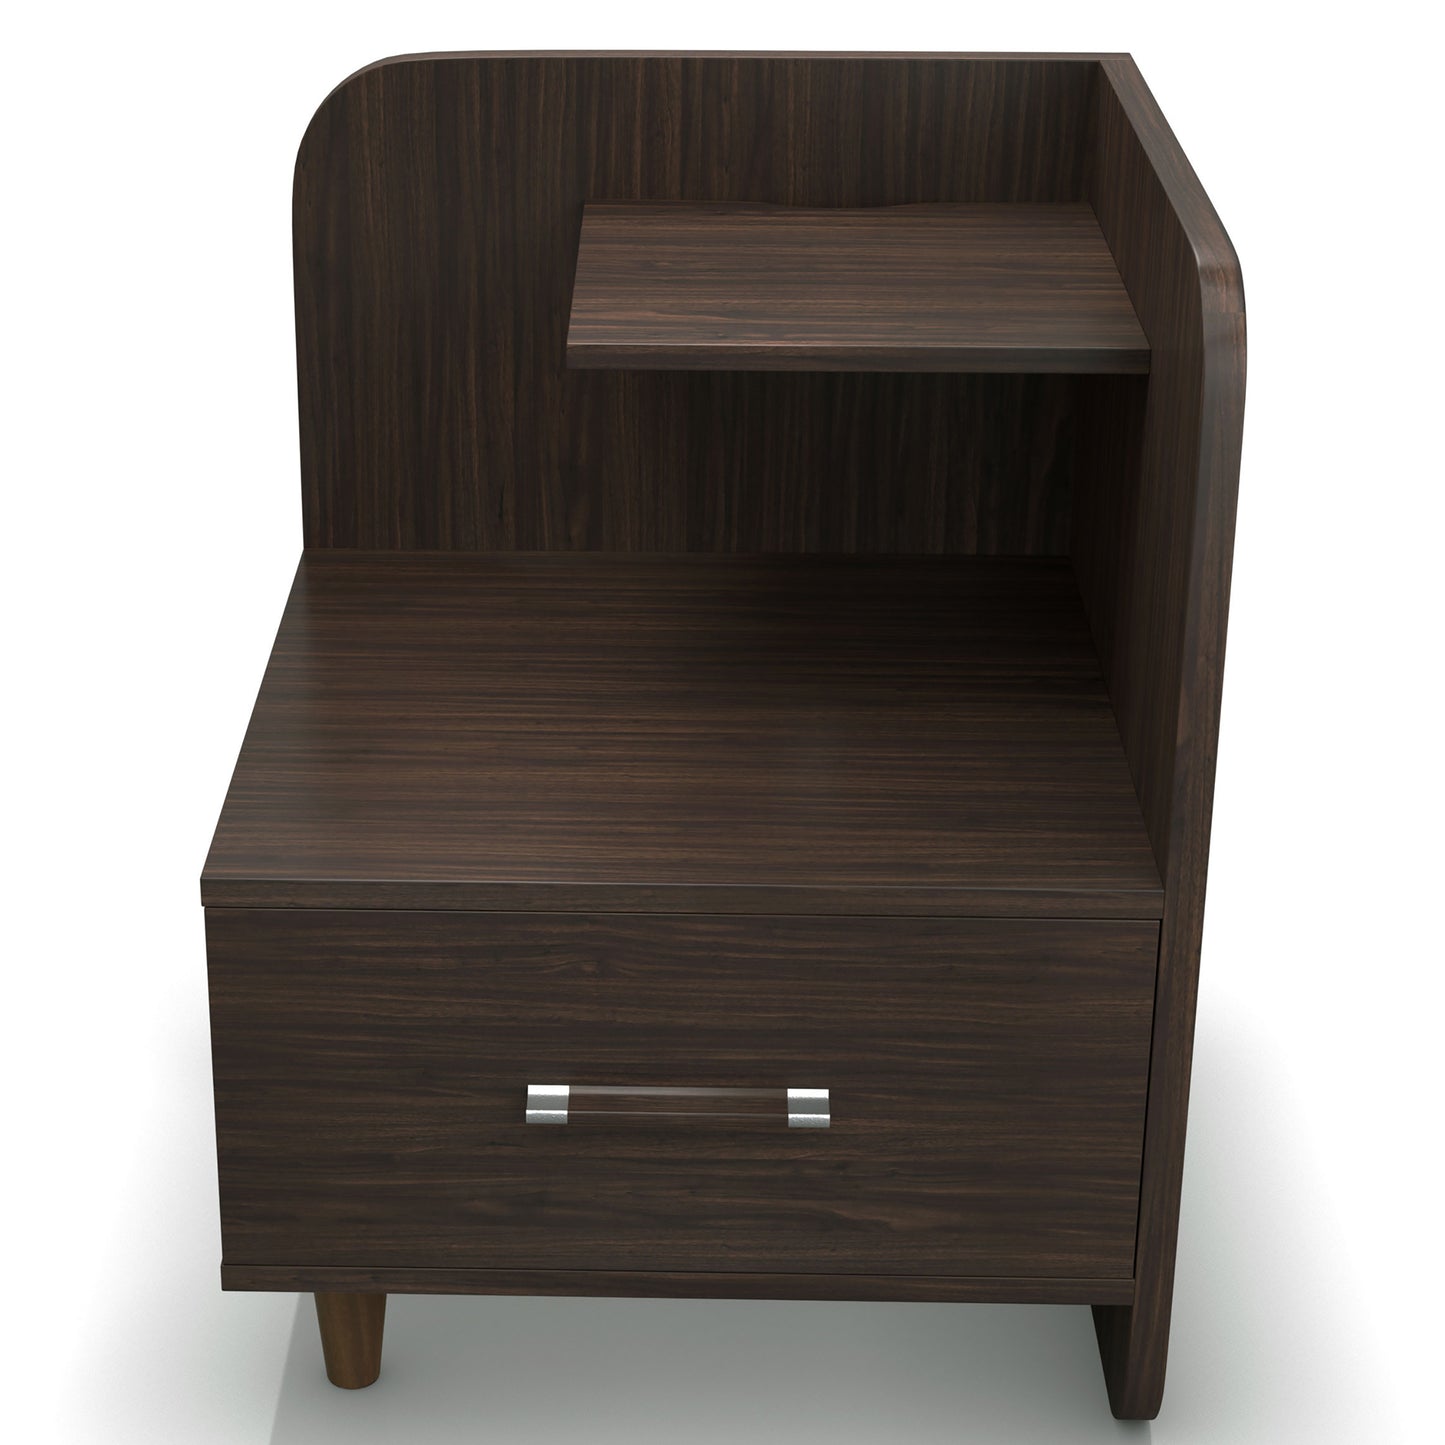 Front-facing contemporary wenge one-drawer nightstand with a mini shelf on a white background